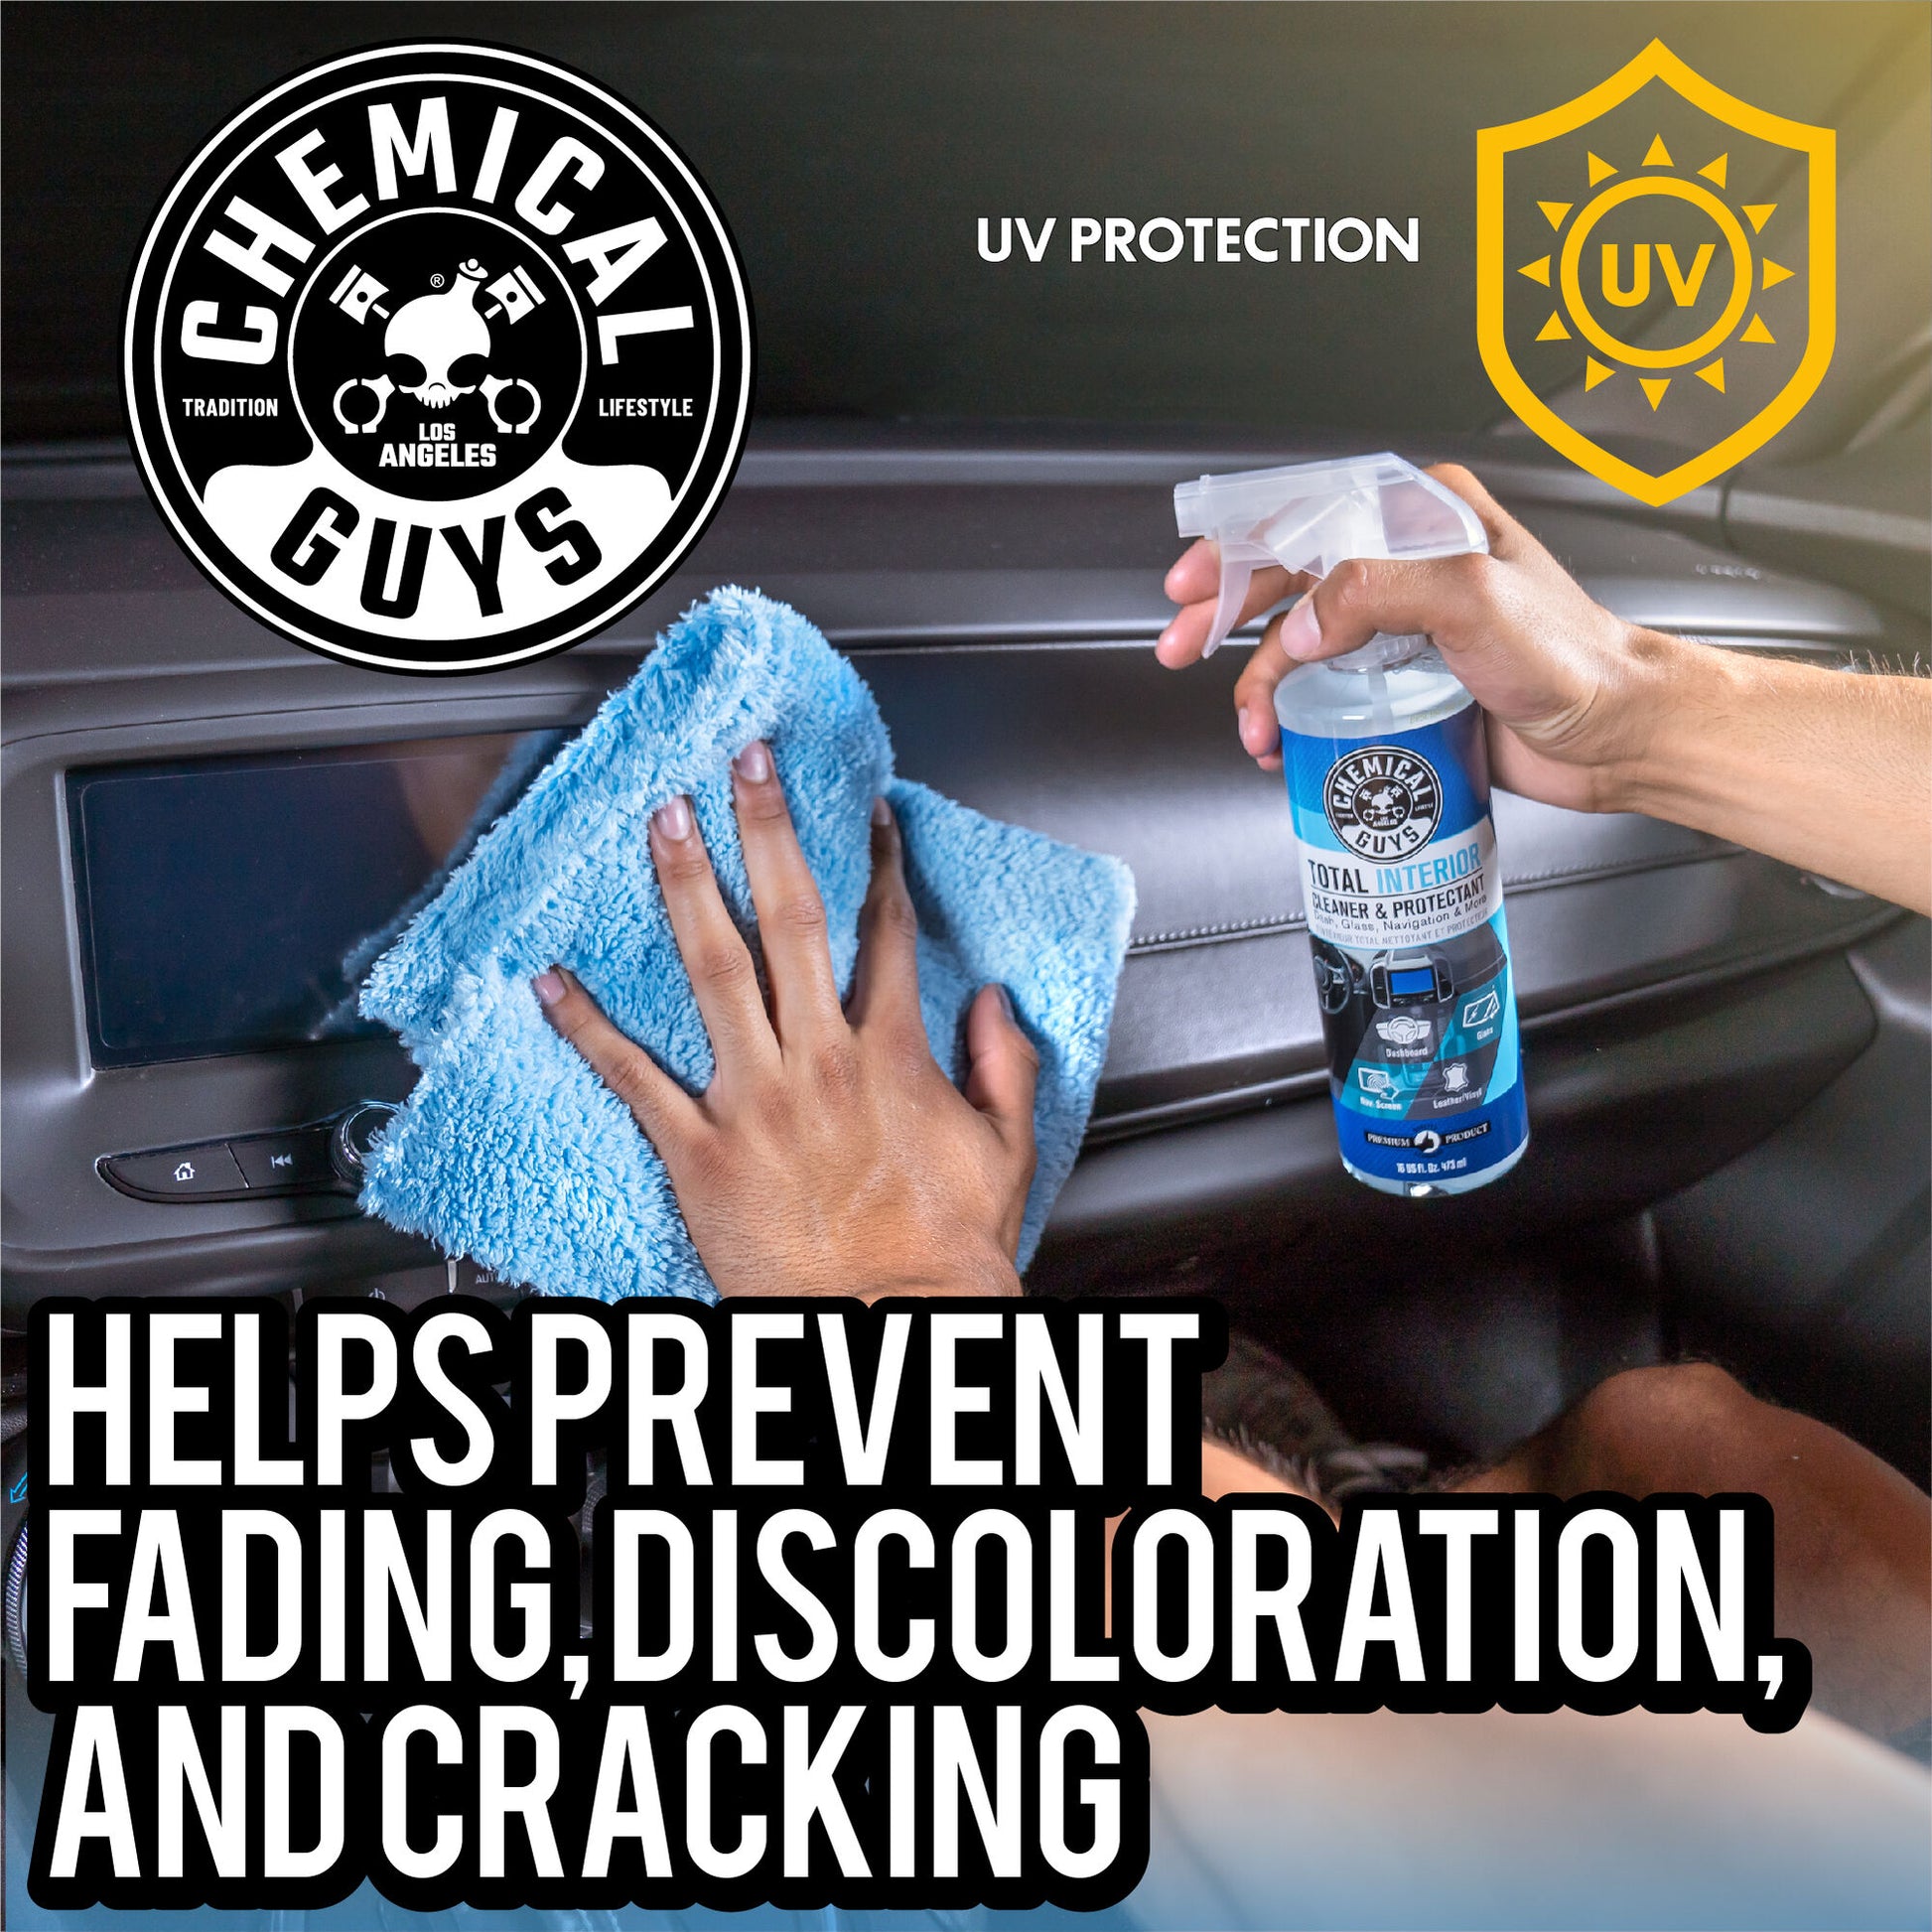 Buy the Chemical Guys Interior Clean Kit - Decontaminate & Protect